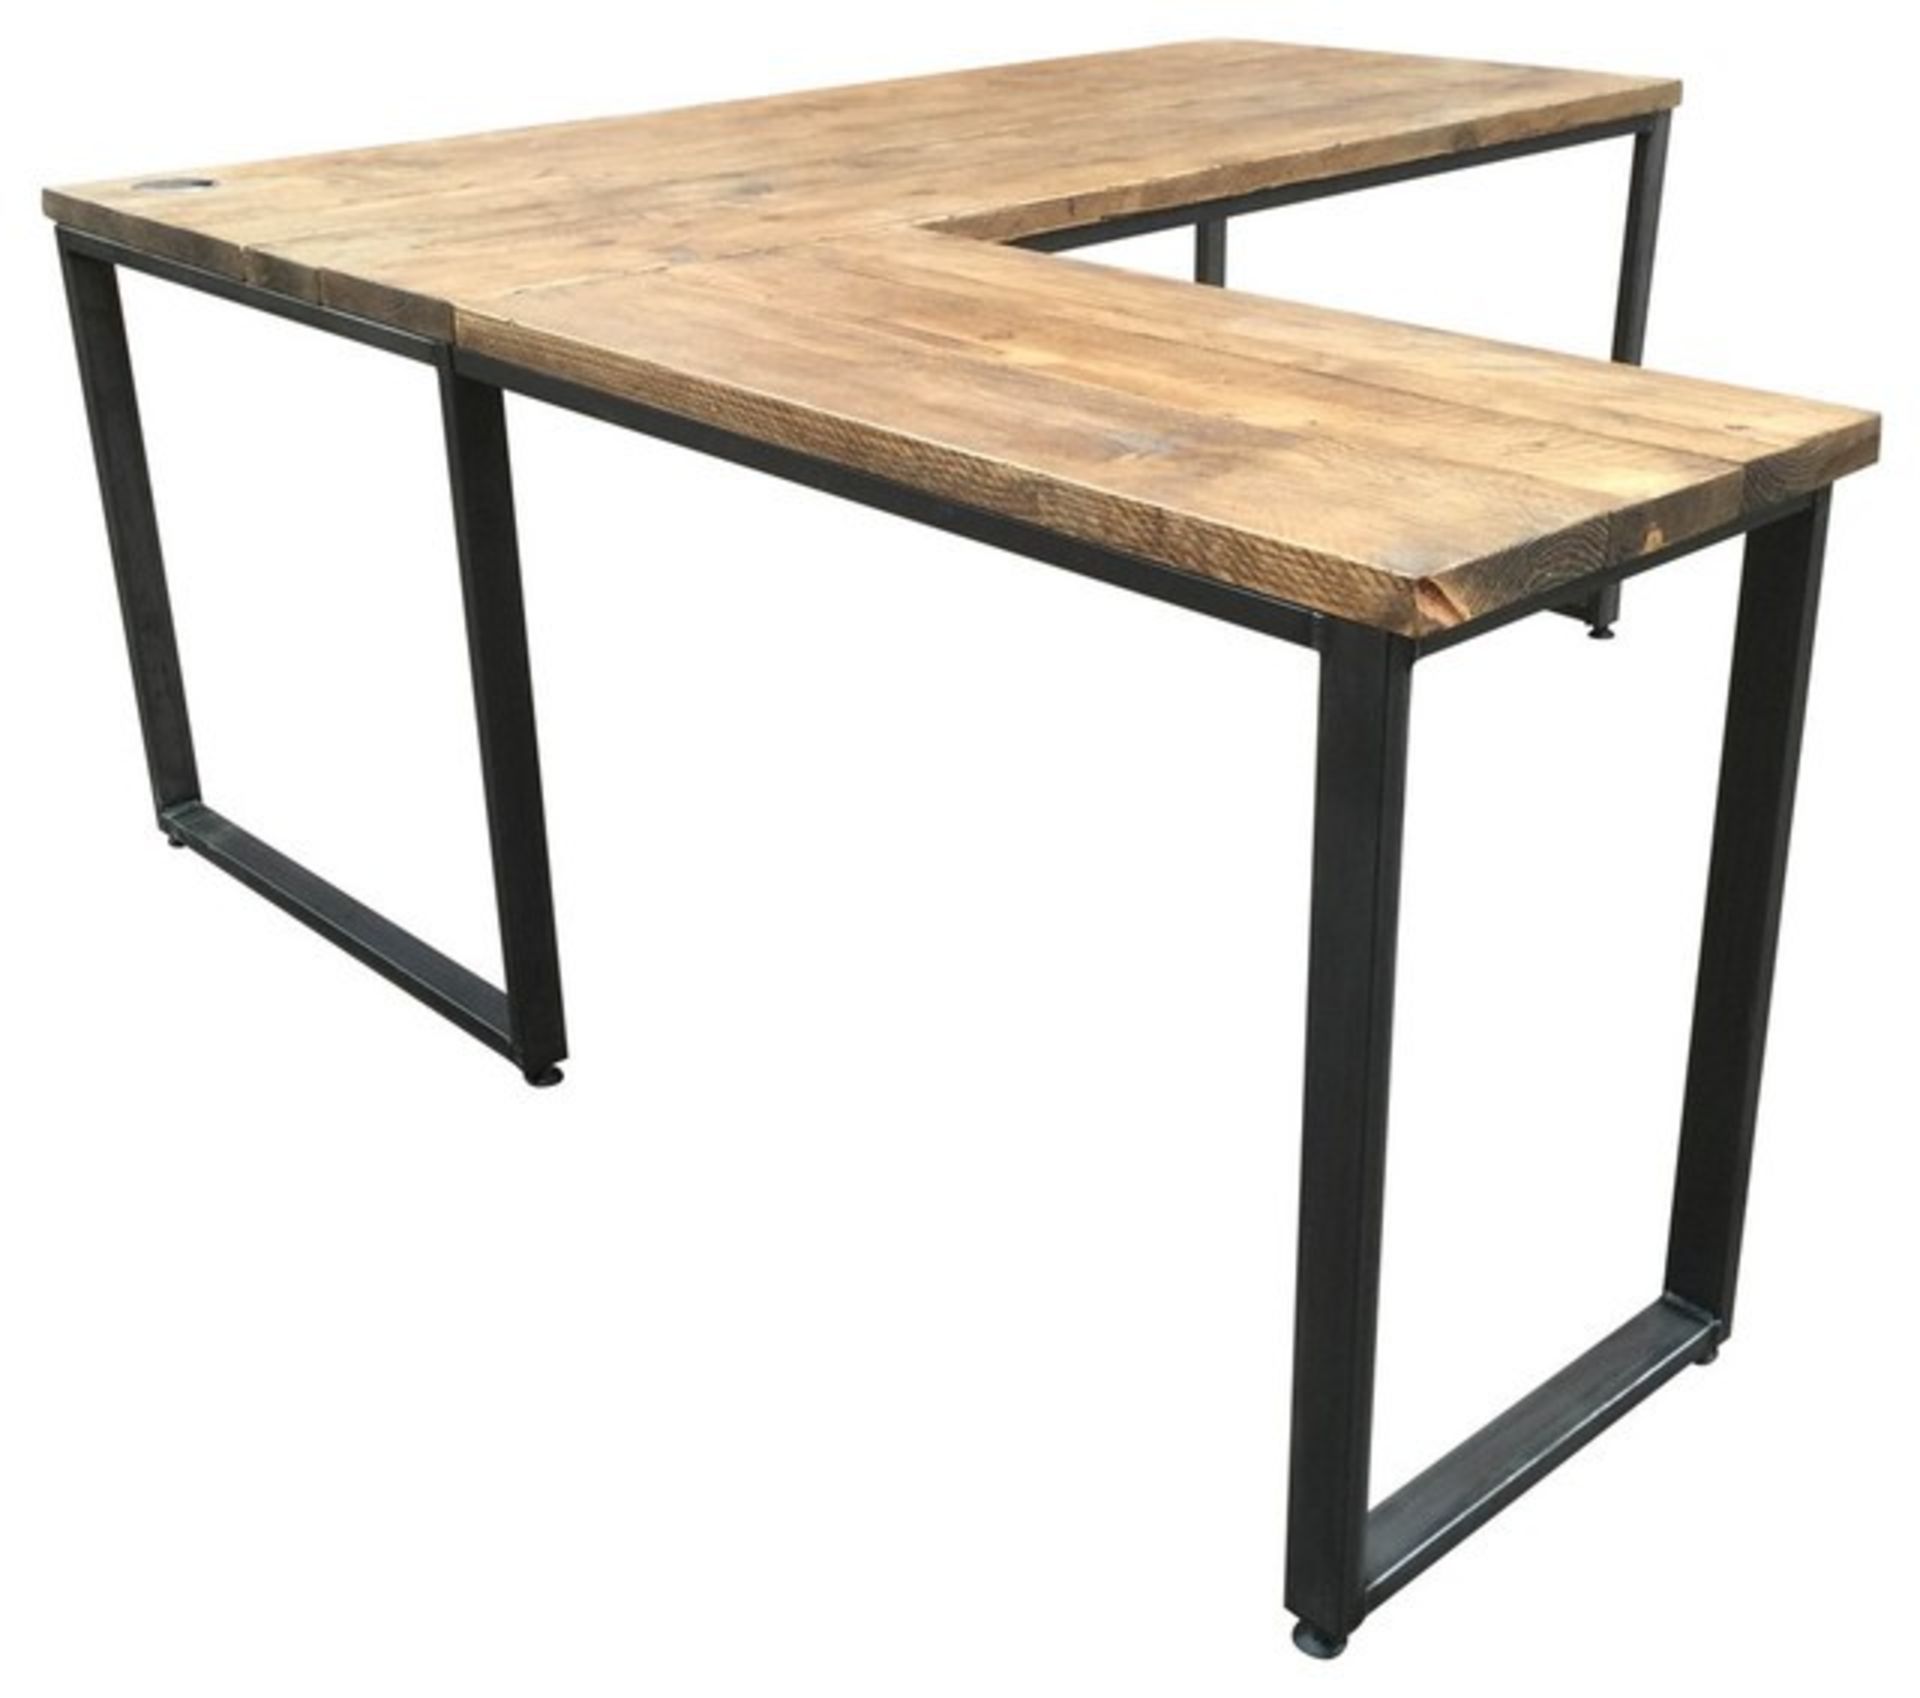 1 GRADE B ASSEMBLED L-SHAPED RECLAIMED LARGE WOOD DESK, RIGHT HAND RETURN IN DARK OAK, PICTURE FOR